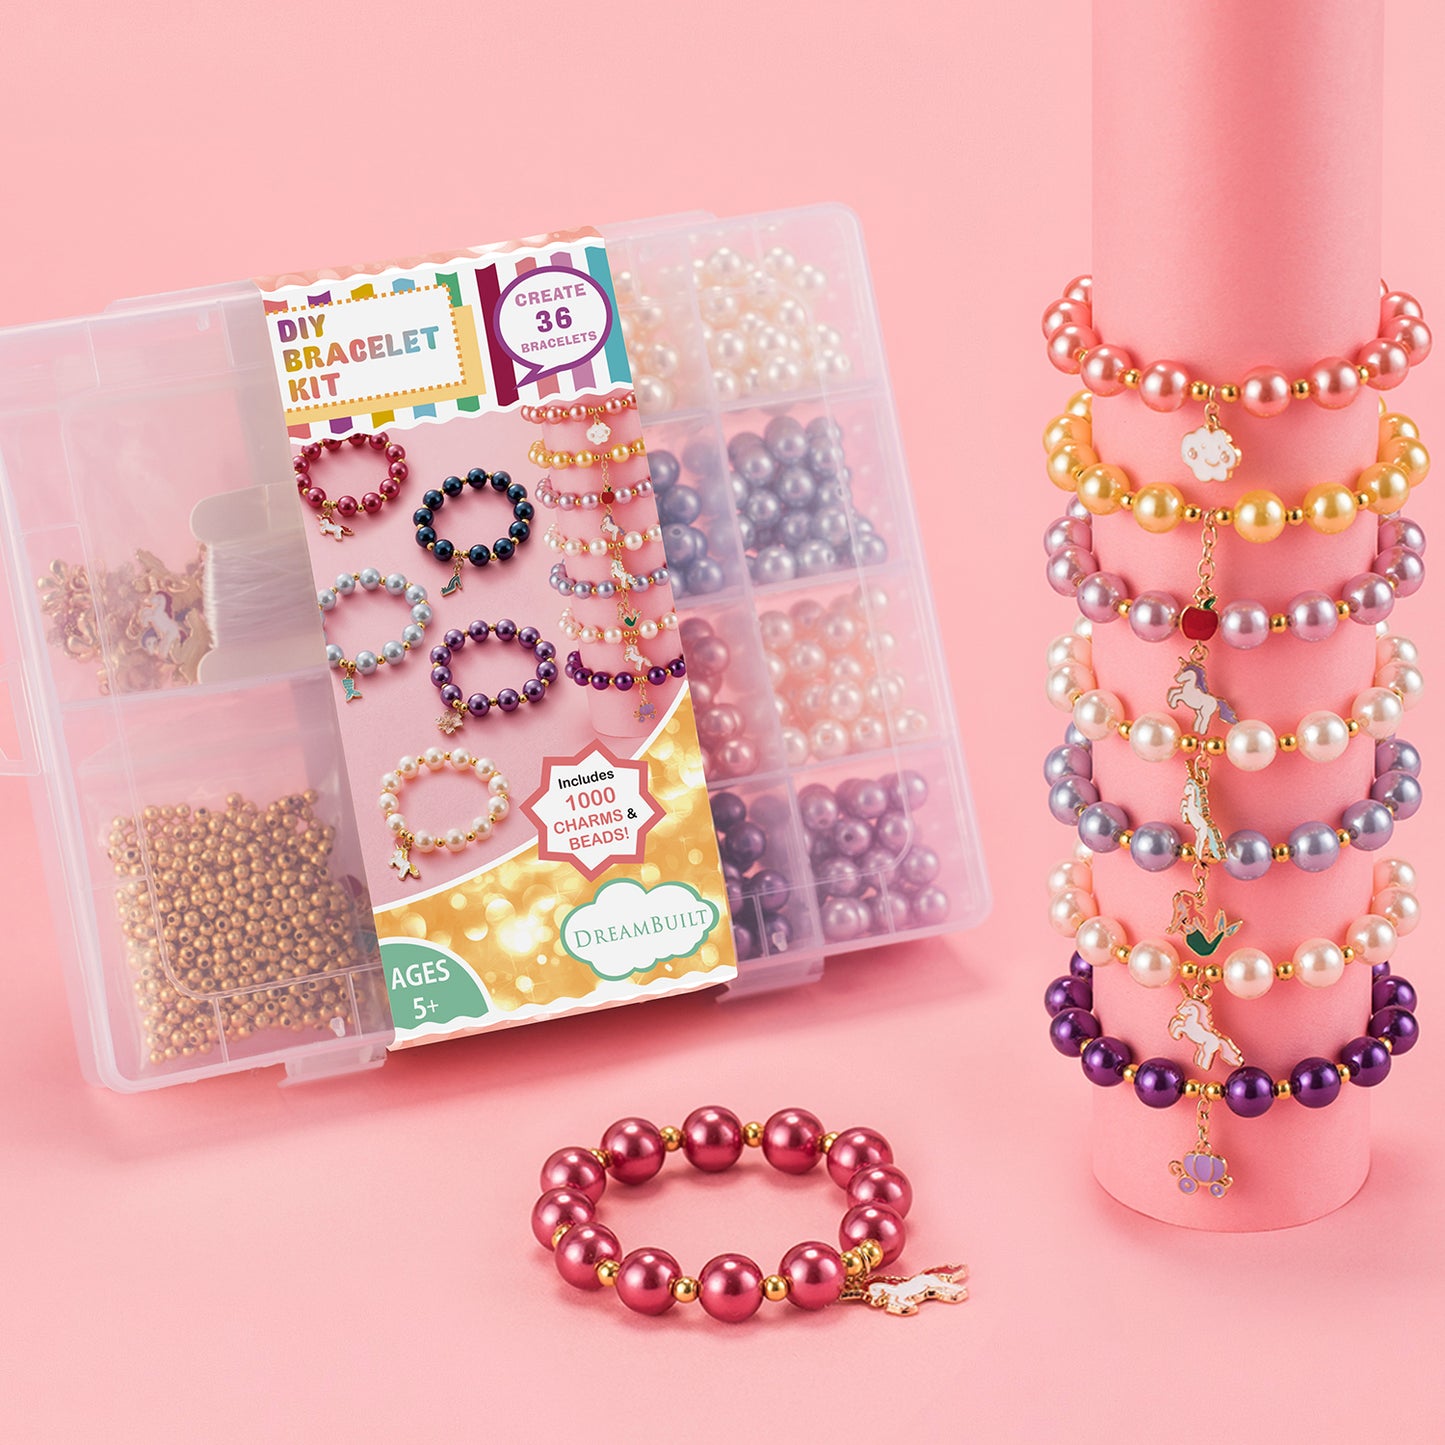 Bracelet Making Kit for Girls, Charms for Jewelry Making Kit with 1000+ Charm& Beads& Pearls, Christmas Gifts/Charm Bracelet for Girls Teens, Friendship Bracelet Making Kit for Girls